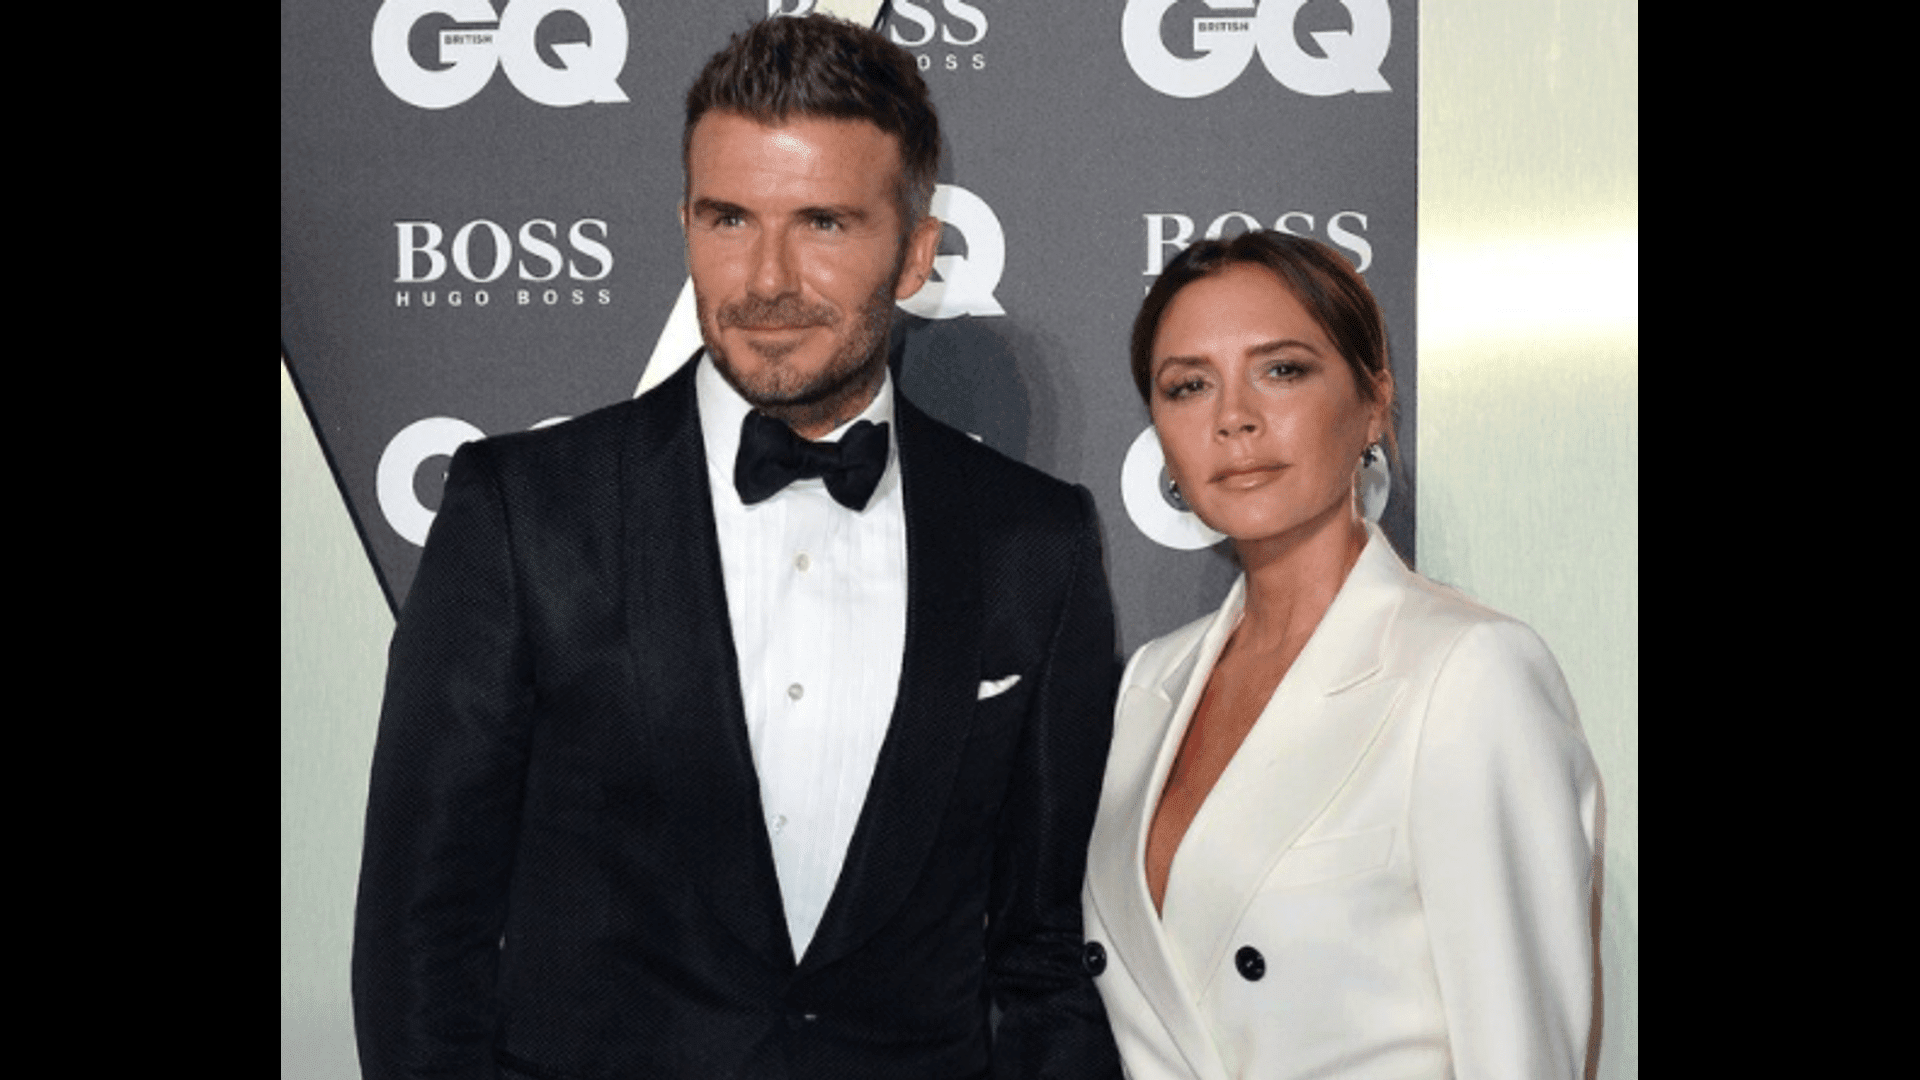 the-beckhams-were-victims-of-a-burglary-while-at-their-london-home